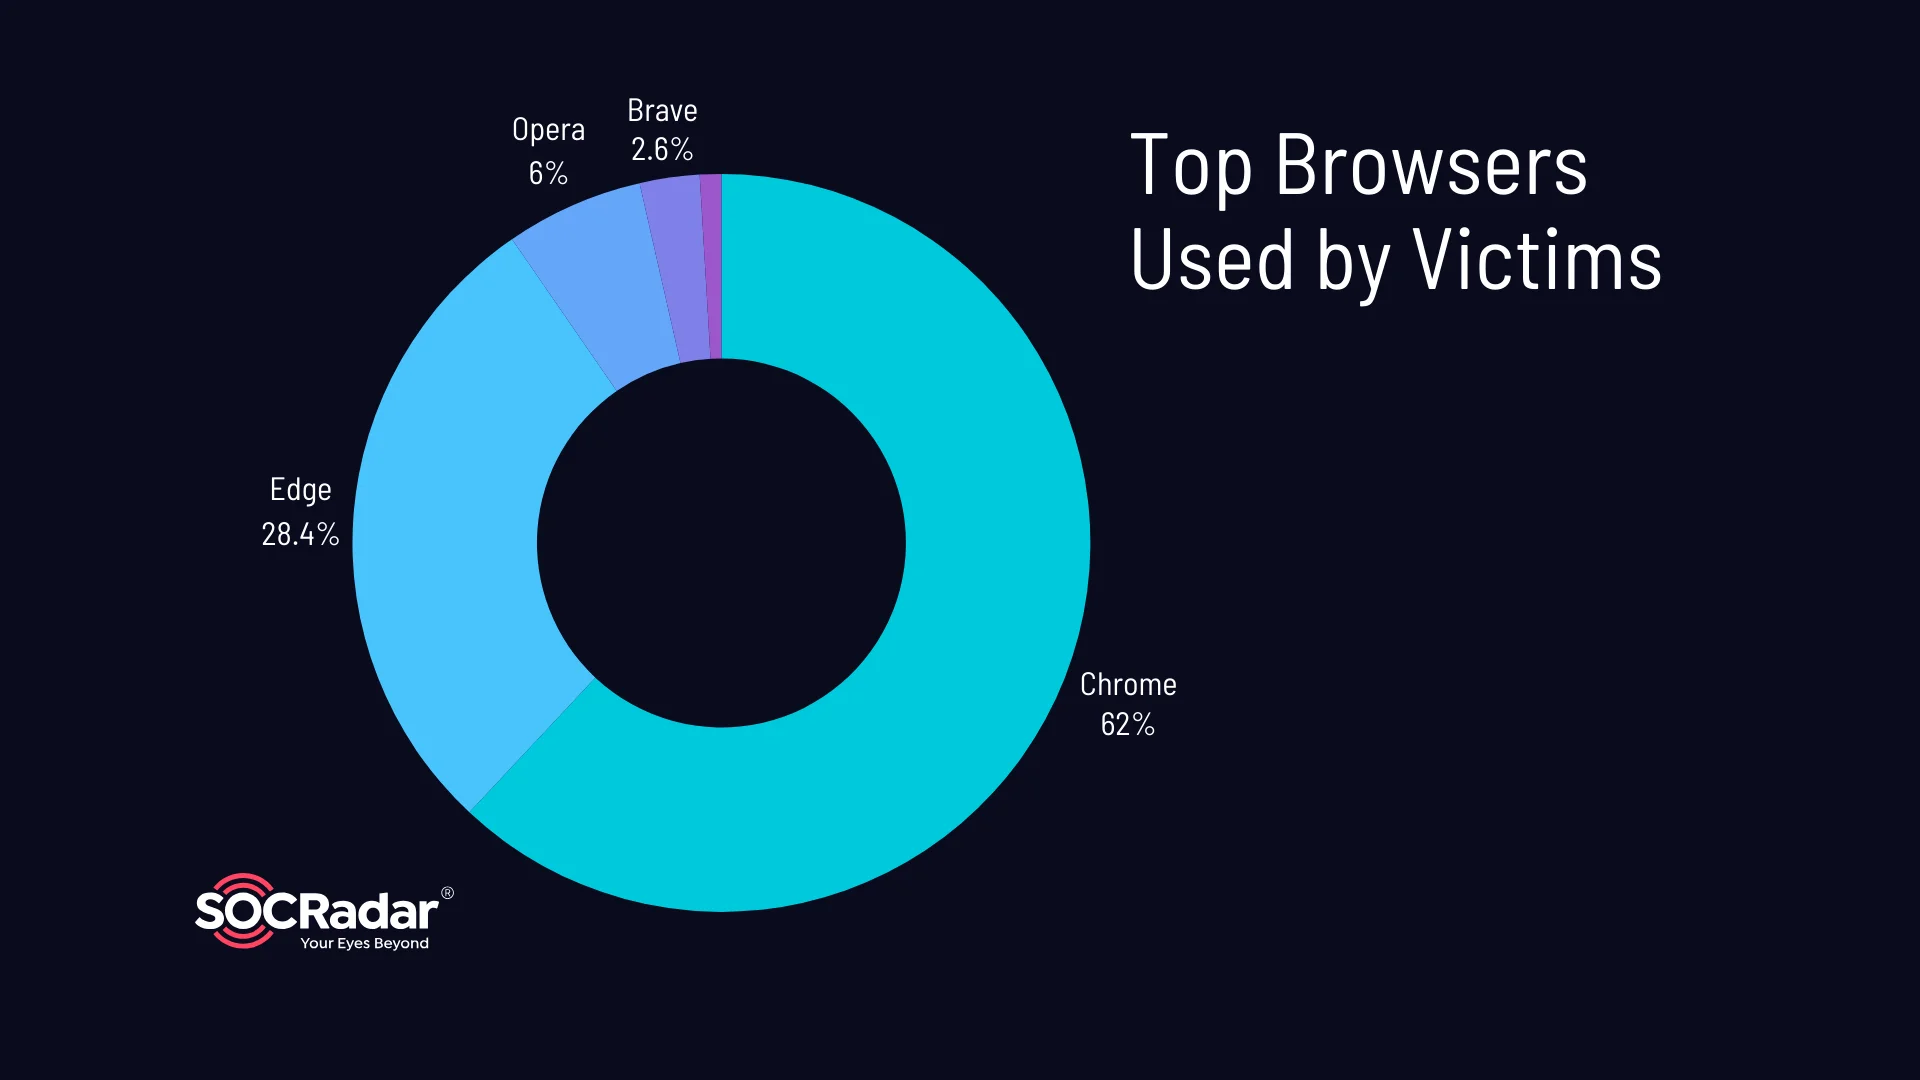 Top browsers used by ChatGPT users found in stealer logs